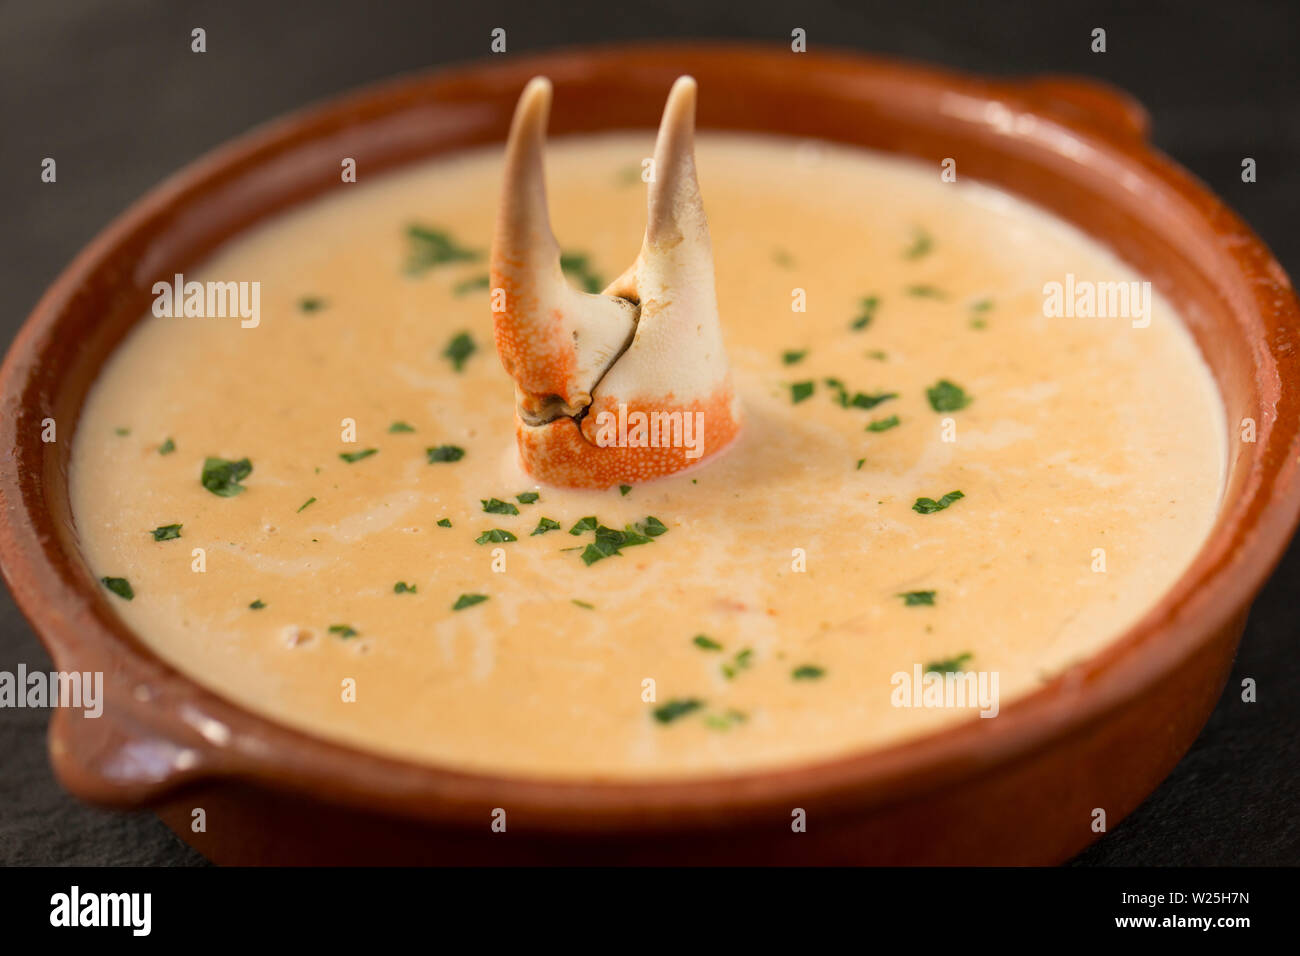 A homemade spider crab bisque made from a spider crab, Maja brachydactyla, that was caught in the English Channel. It has been served in a bowl and ga Stock Photo